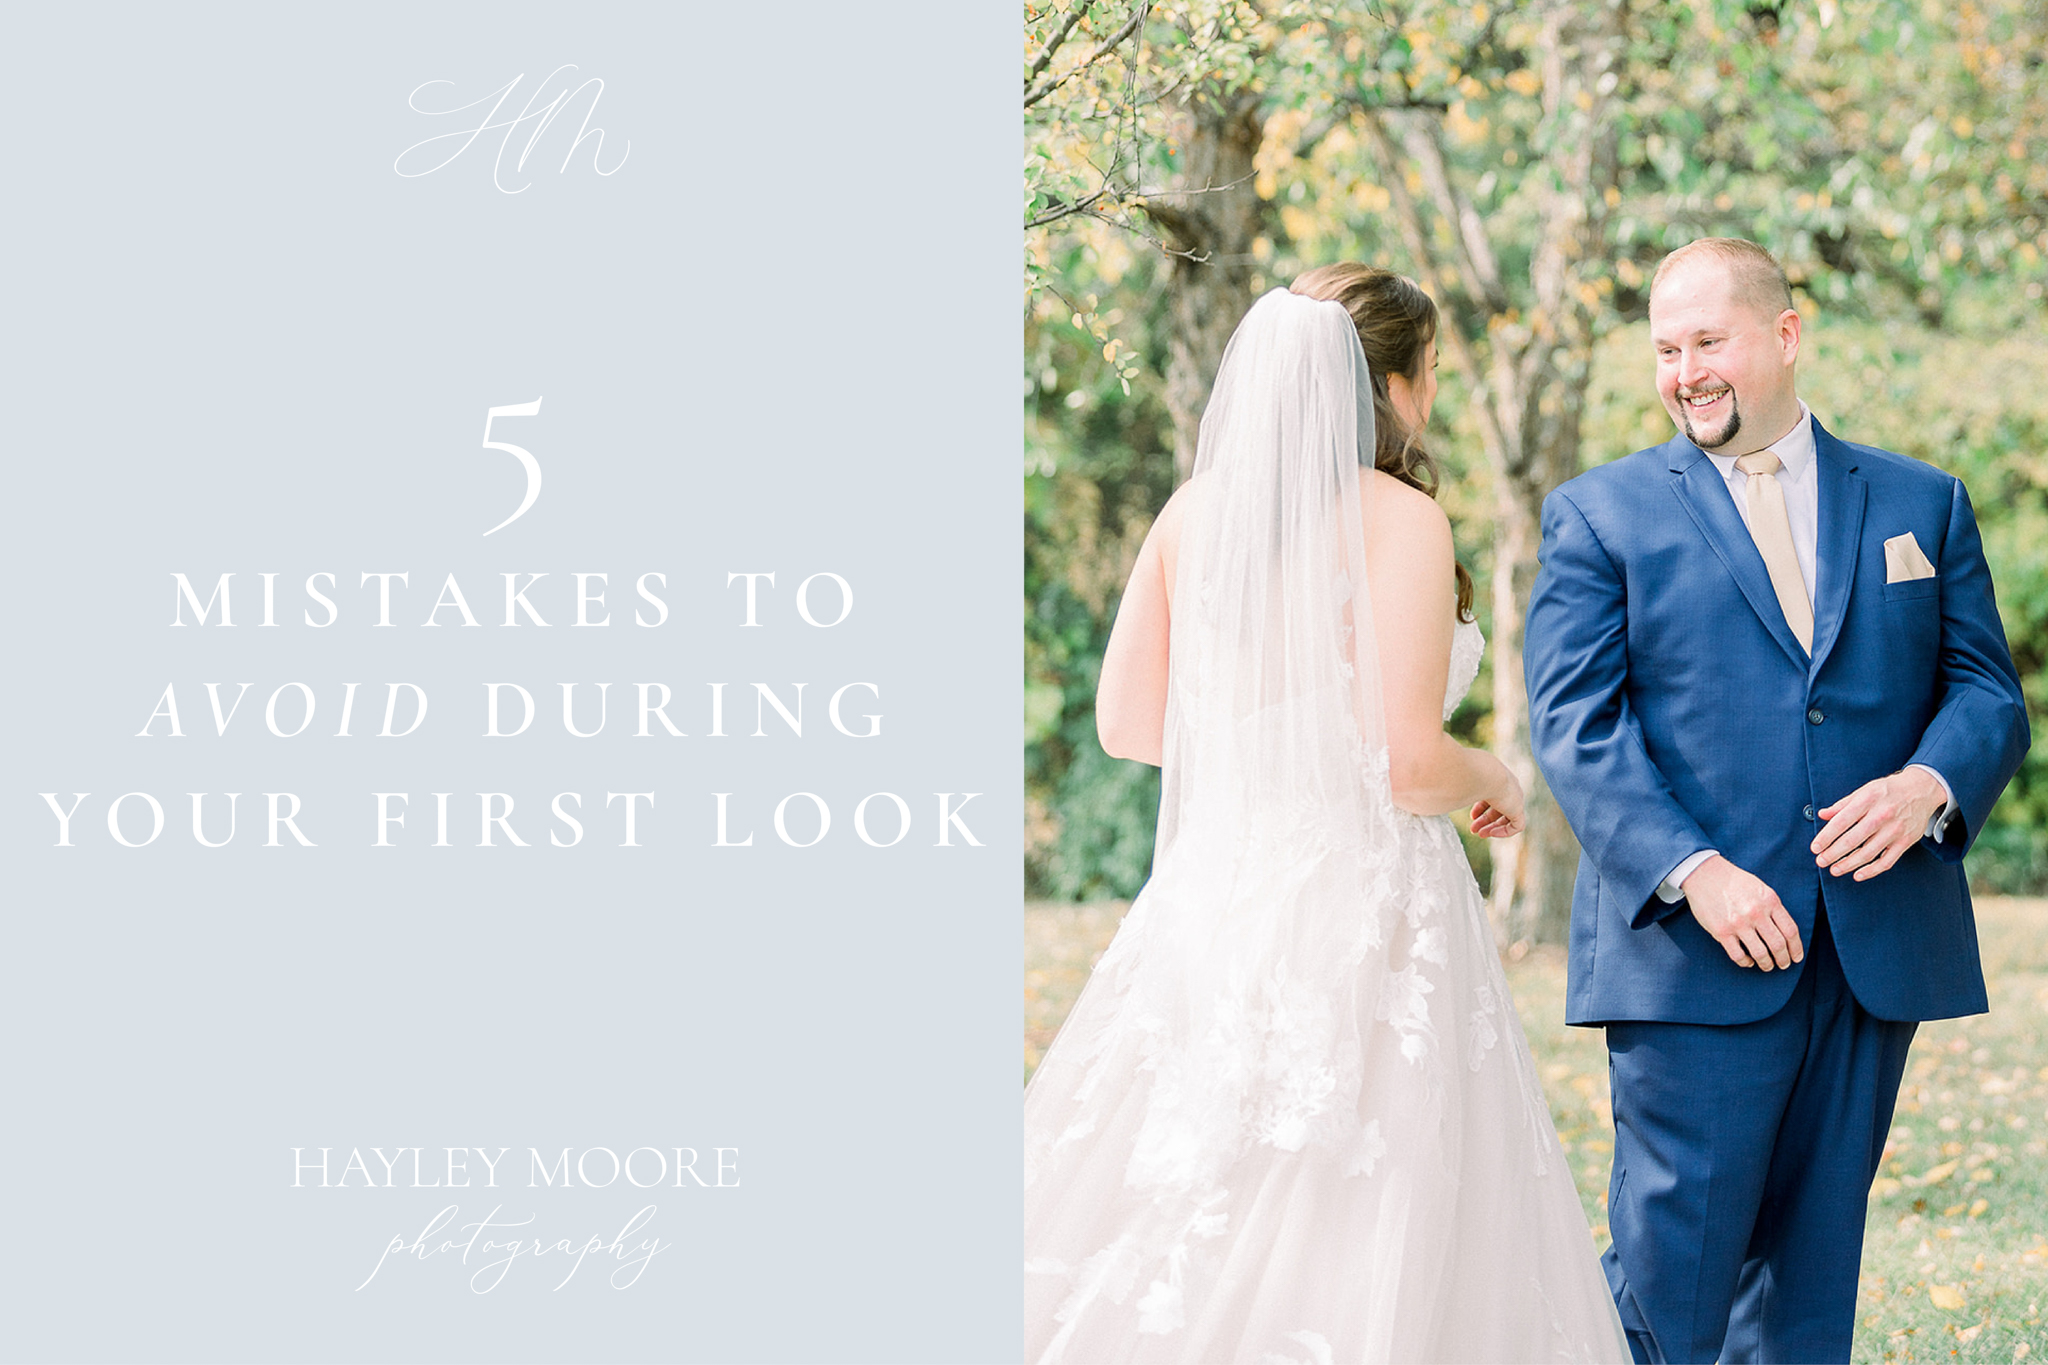 5 Mistakes To Avoid During Your First Look | Hayley Moore Photography